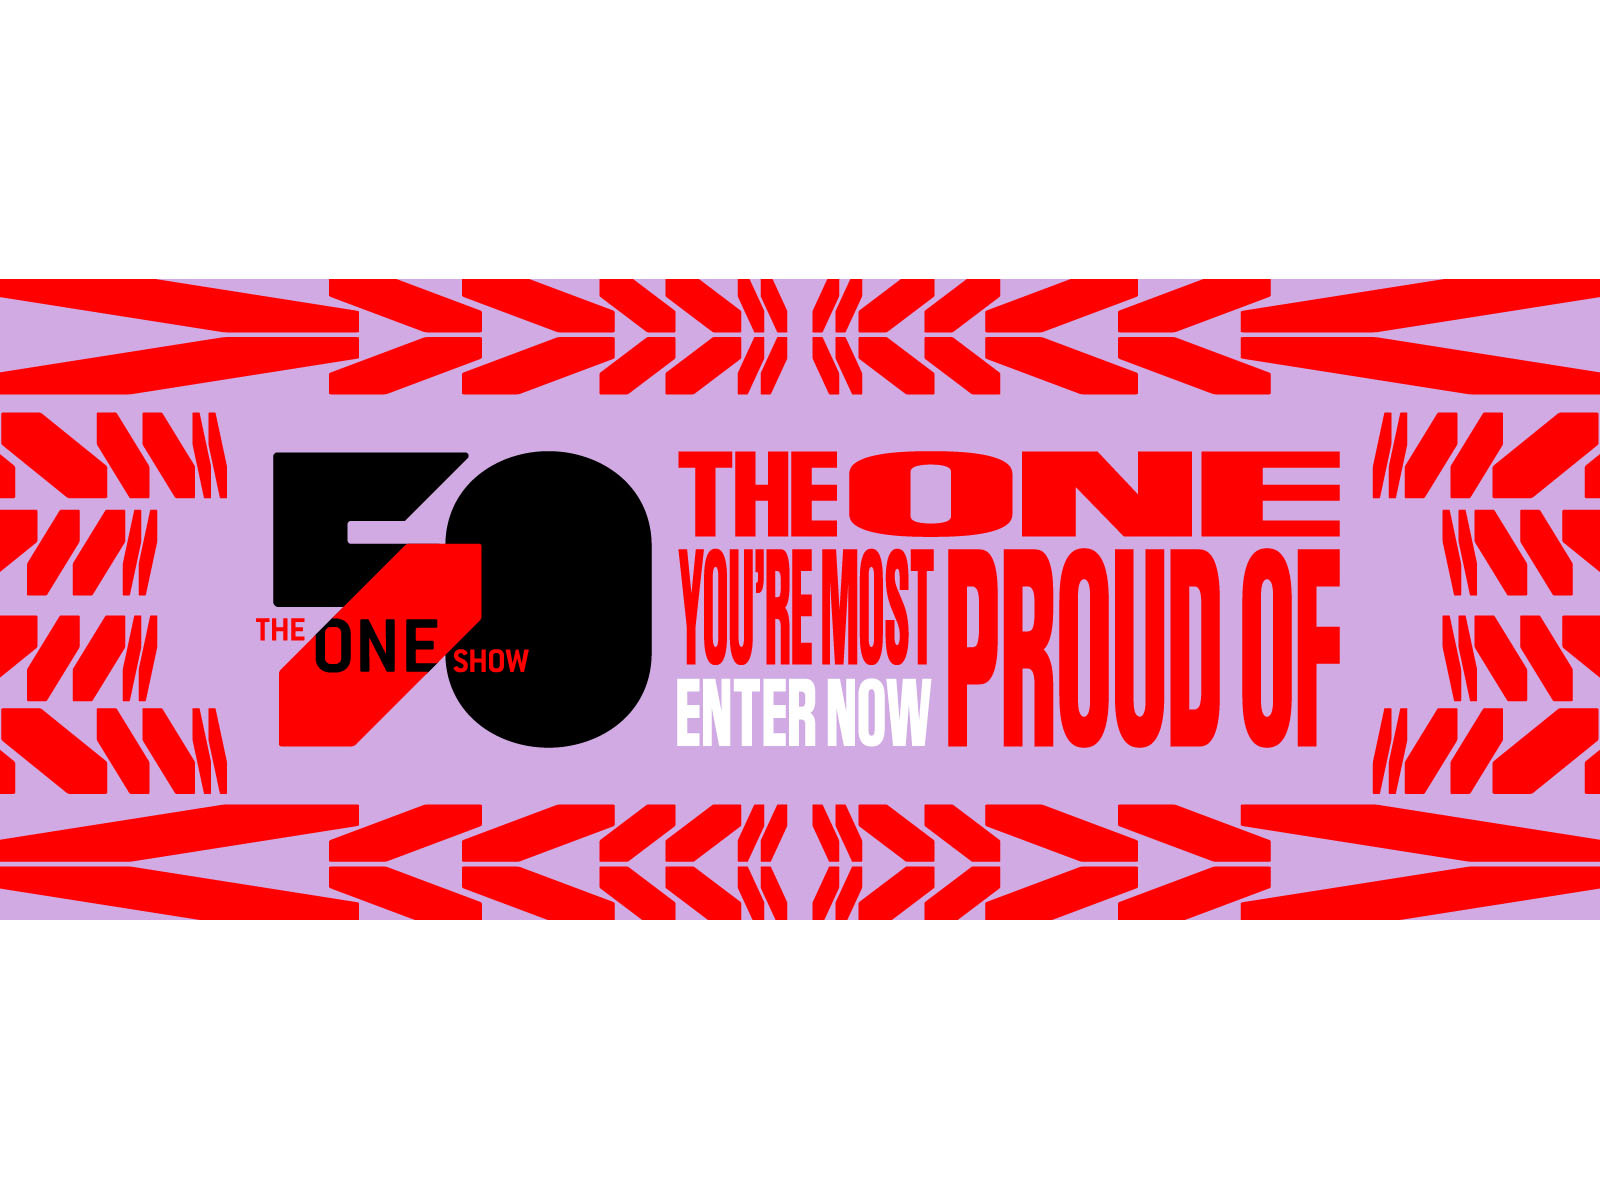 The One Show celebrates 50 Years with an engaging call for entries campaign by Design Army